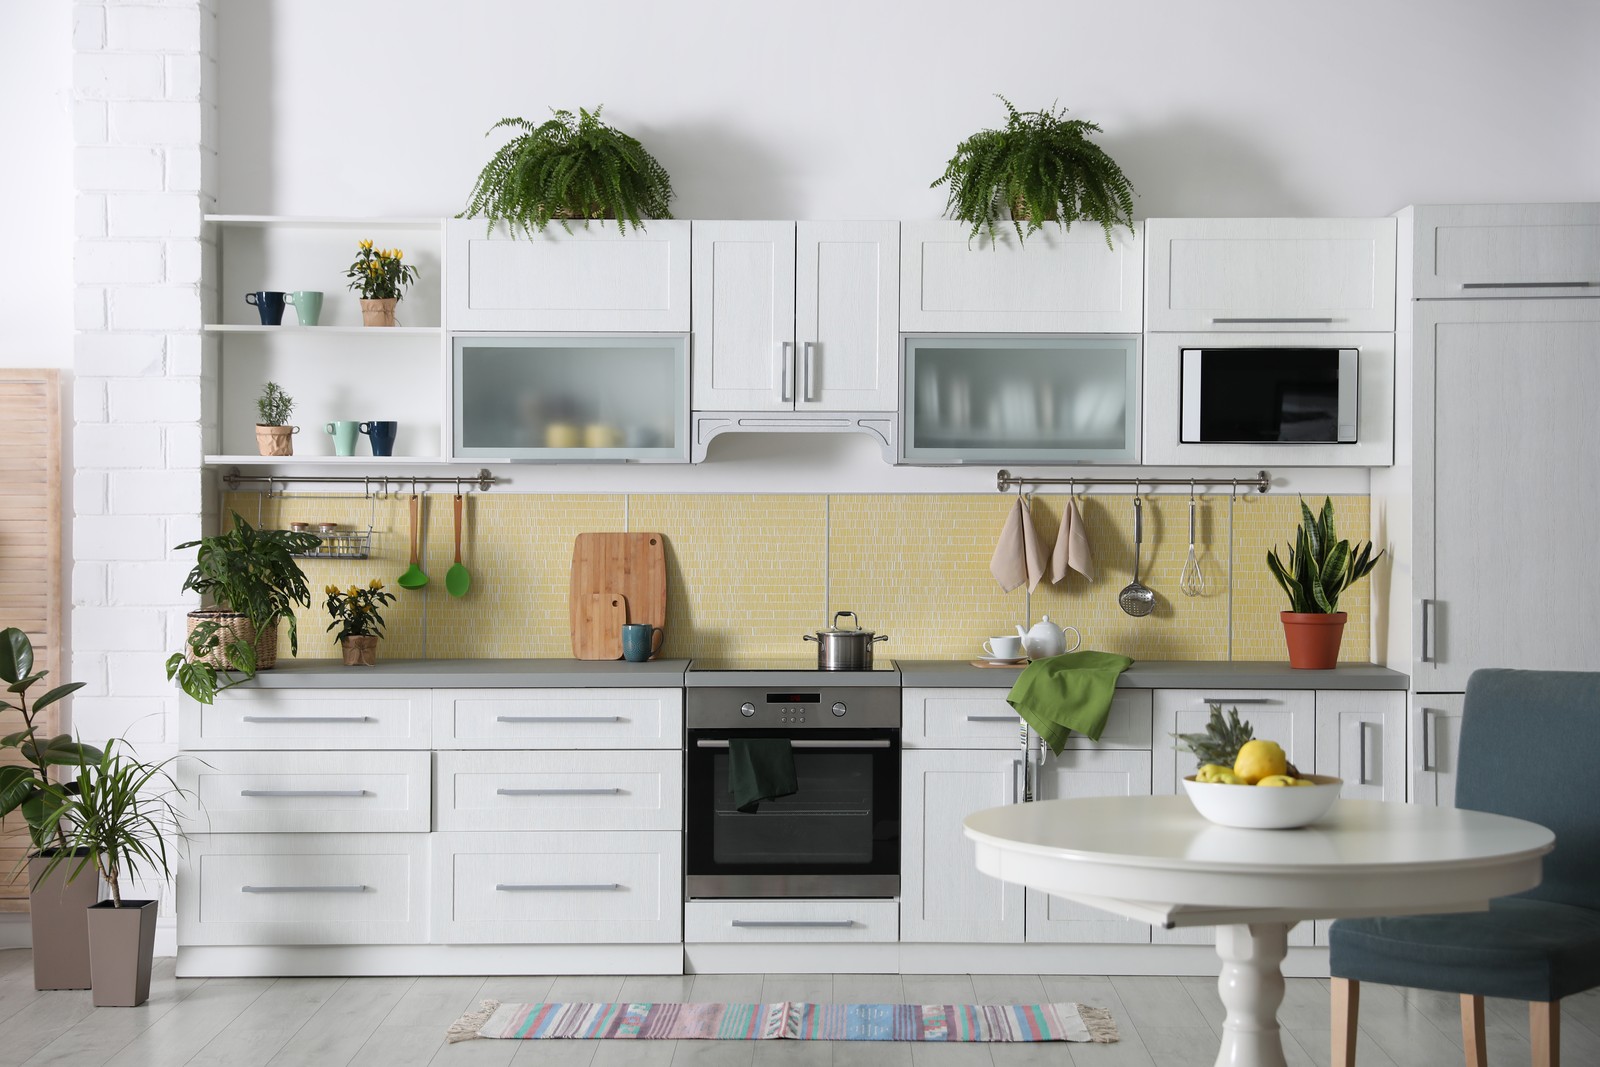 Photo of stylish kitchen interior with green plants. Home decoration